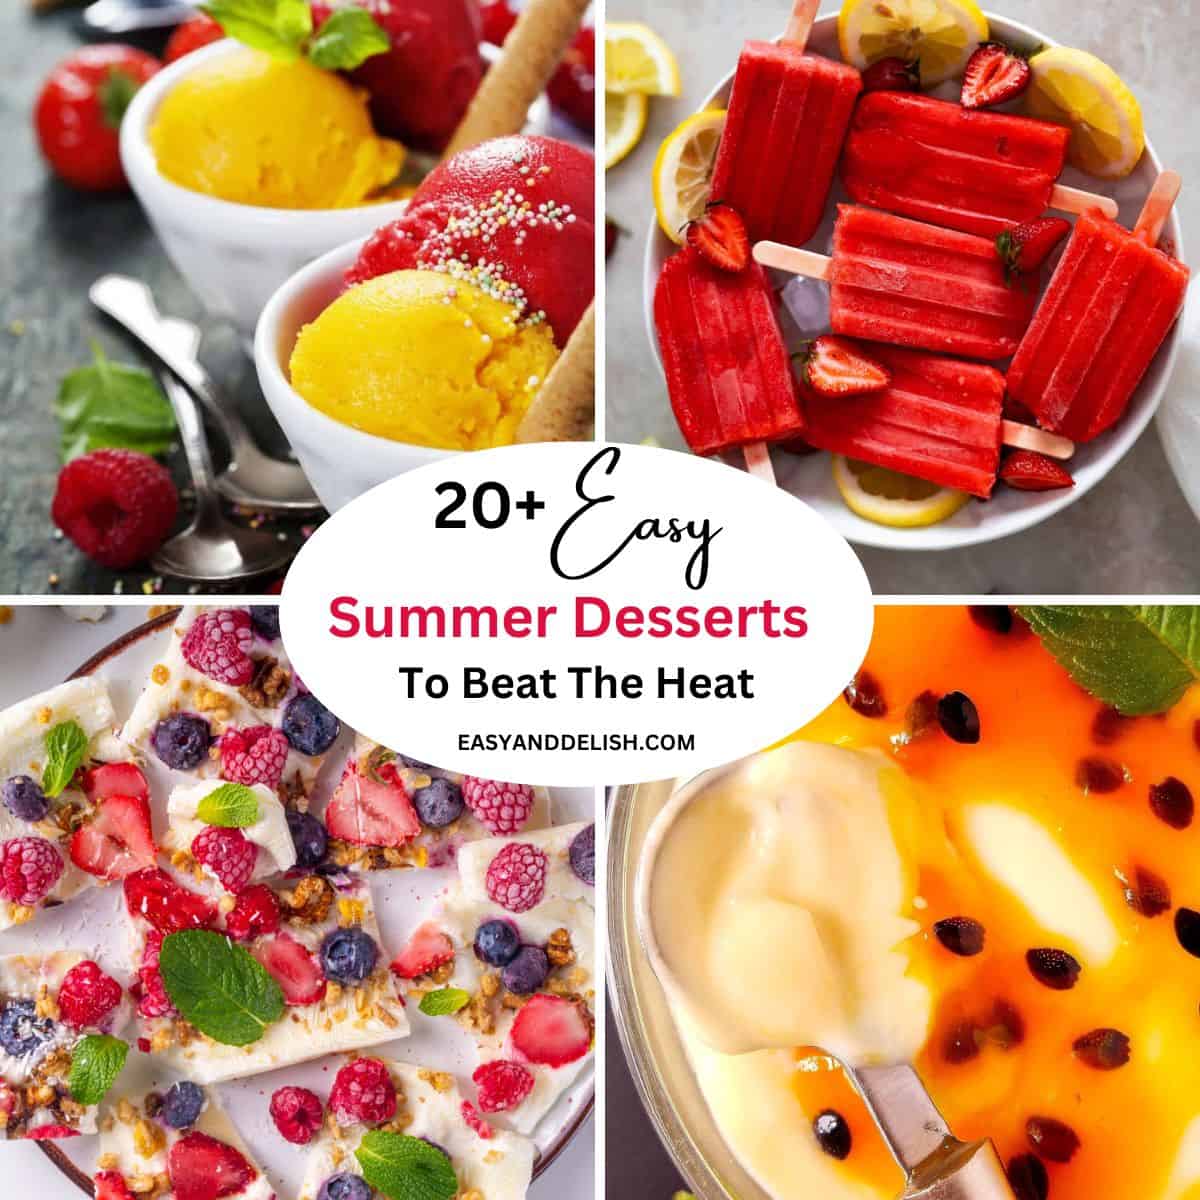 Image collage featuring 4 out of 22 summer dessert recipes, including ice cream, popsicles, mousse, and frozen yogurt bark.